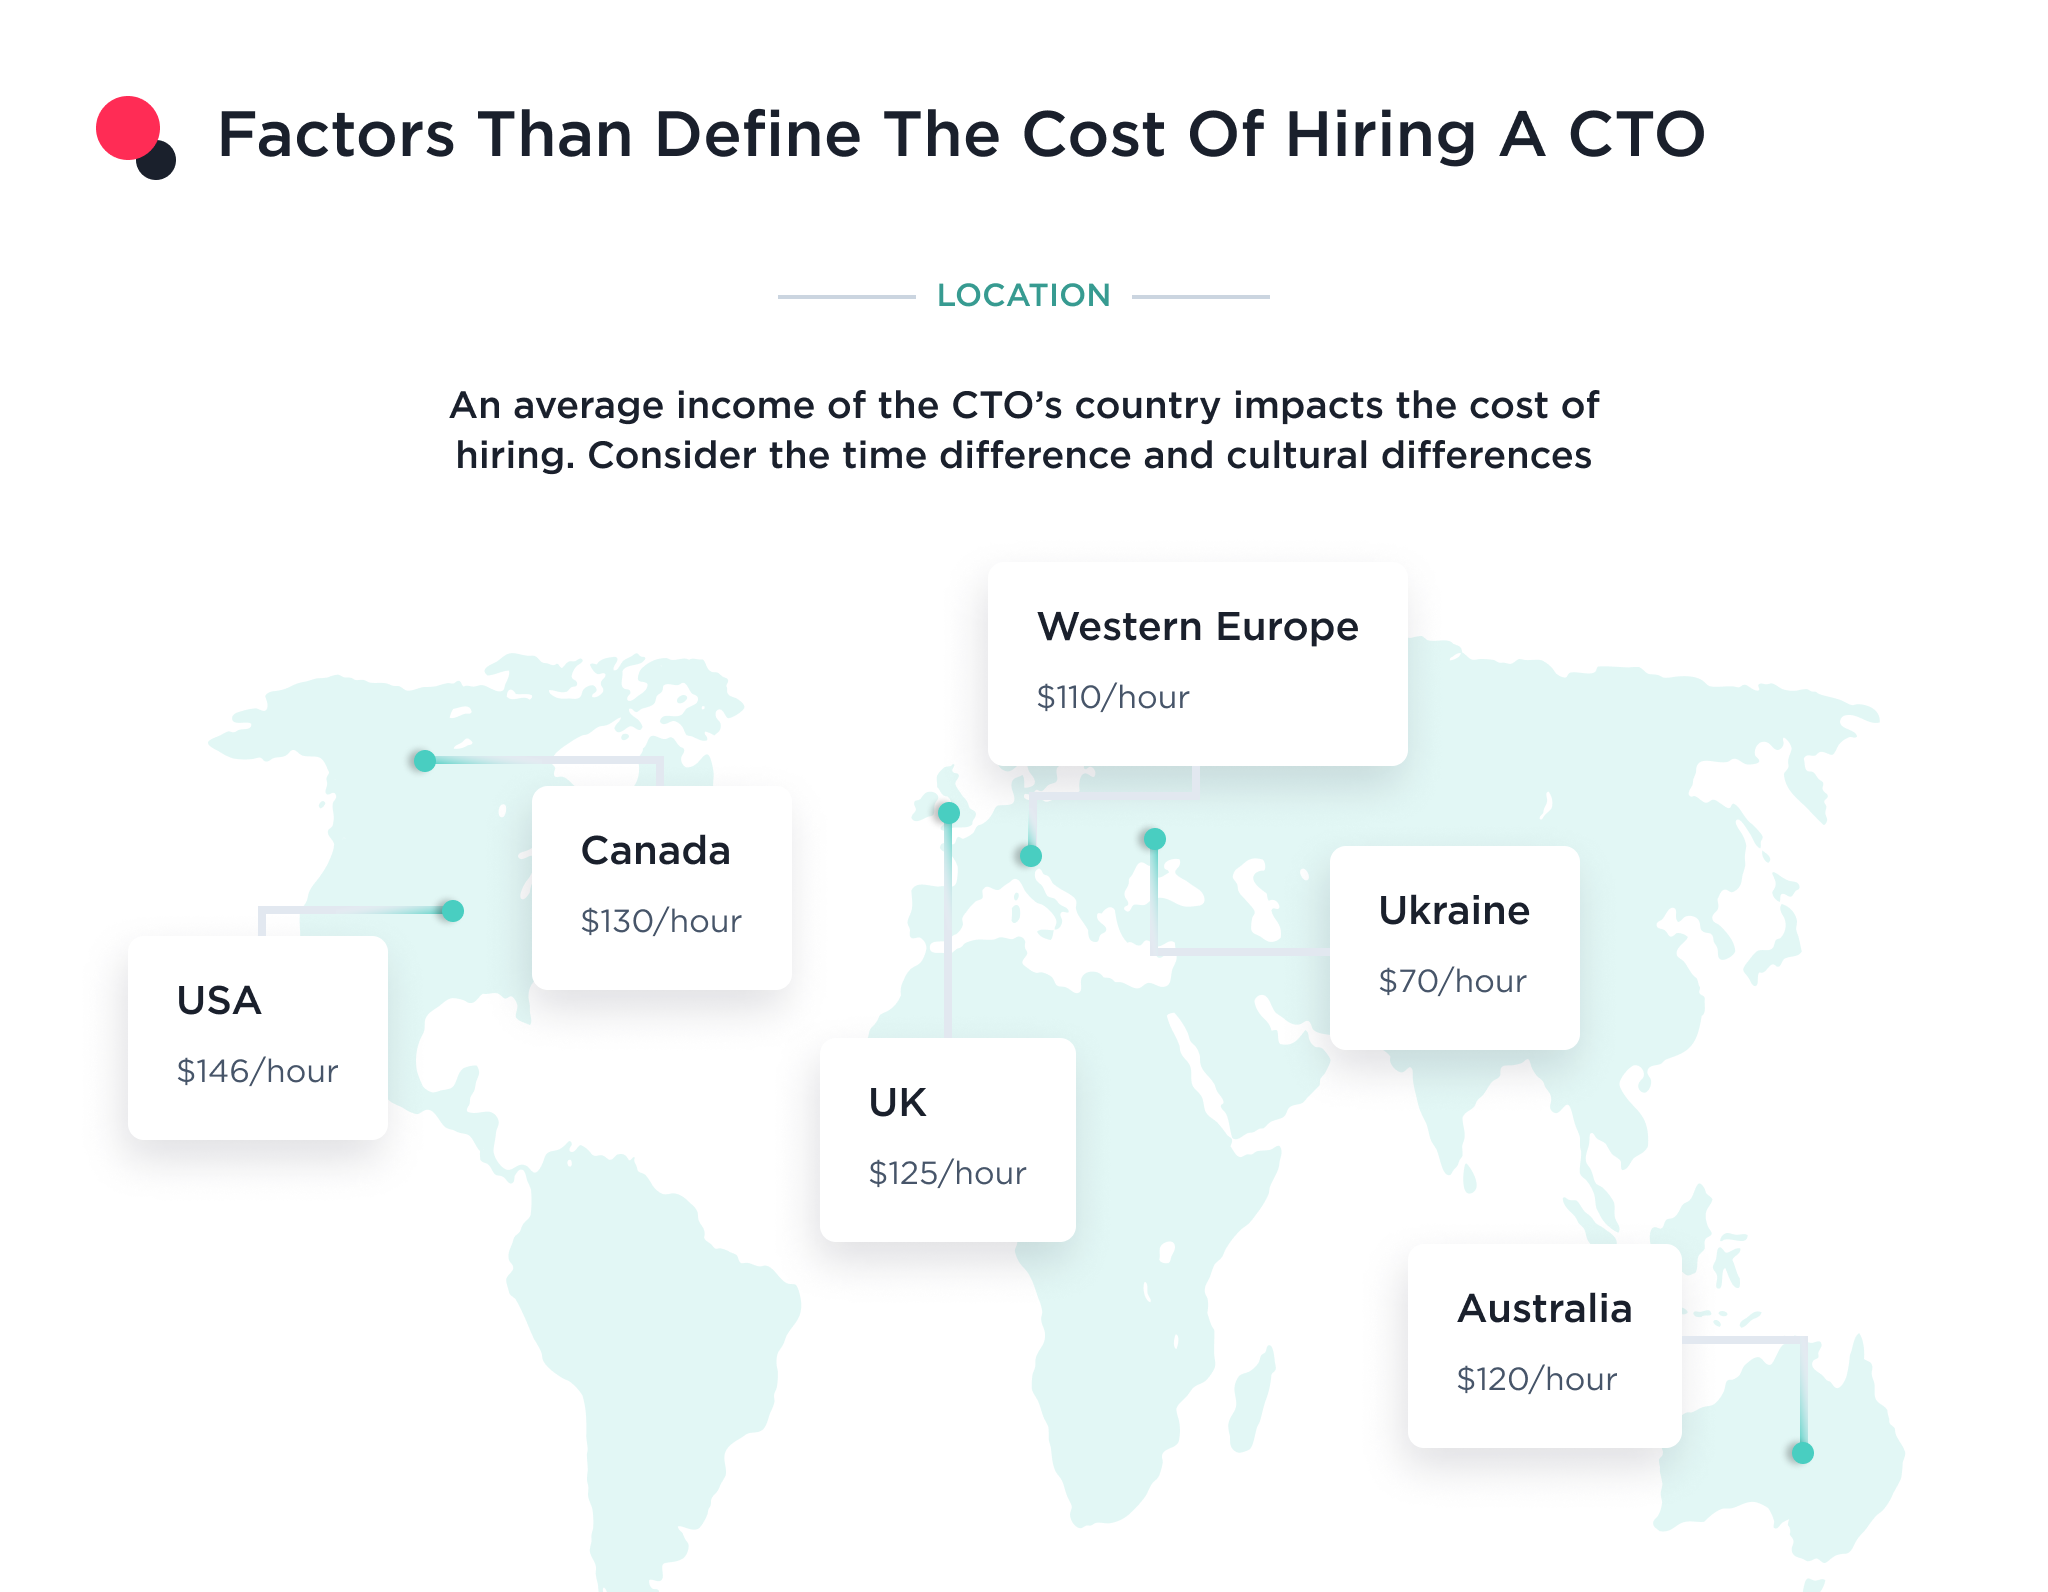 This illustration shows how location impacts the cost of hiring a CTO